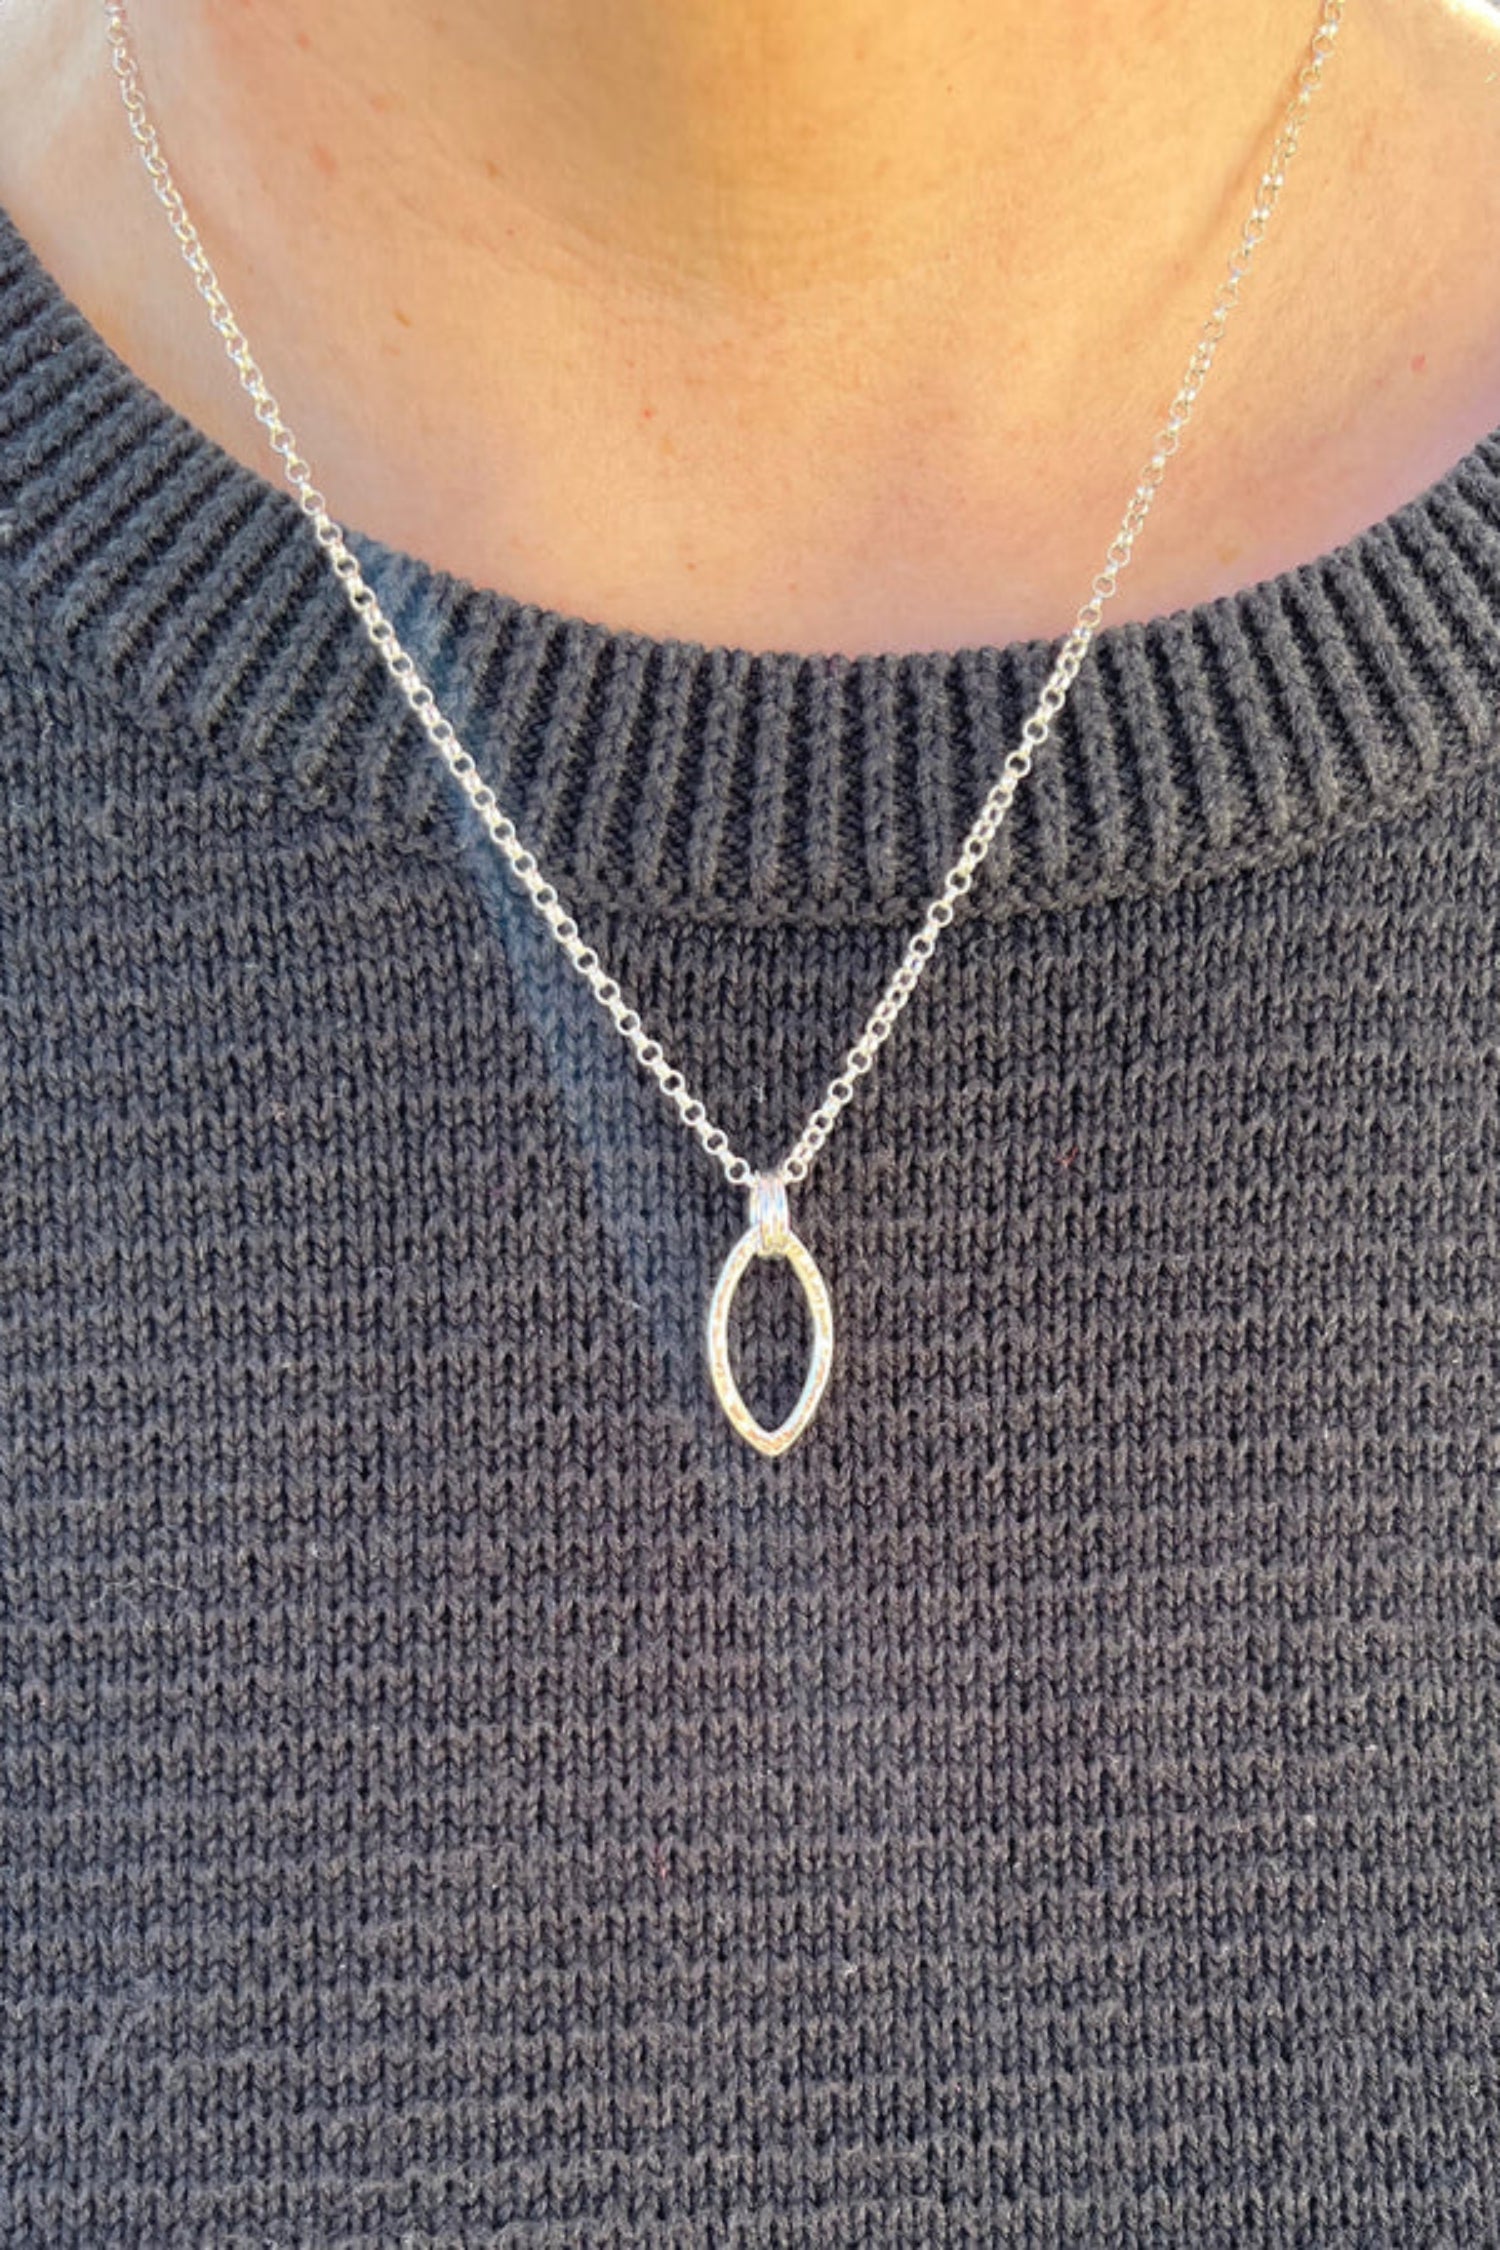 Silver Leaf Necklace - Modern Minimal Nature Inspired Necklace by Mikel Grant, sterling silver, made in Sechelt BC